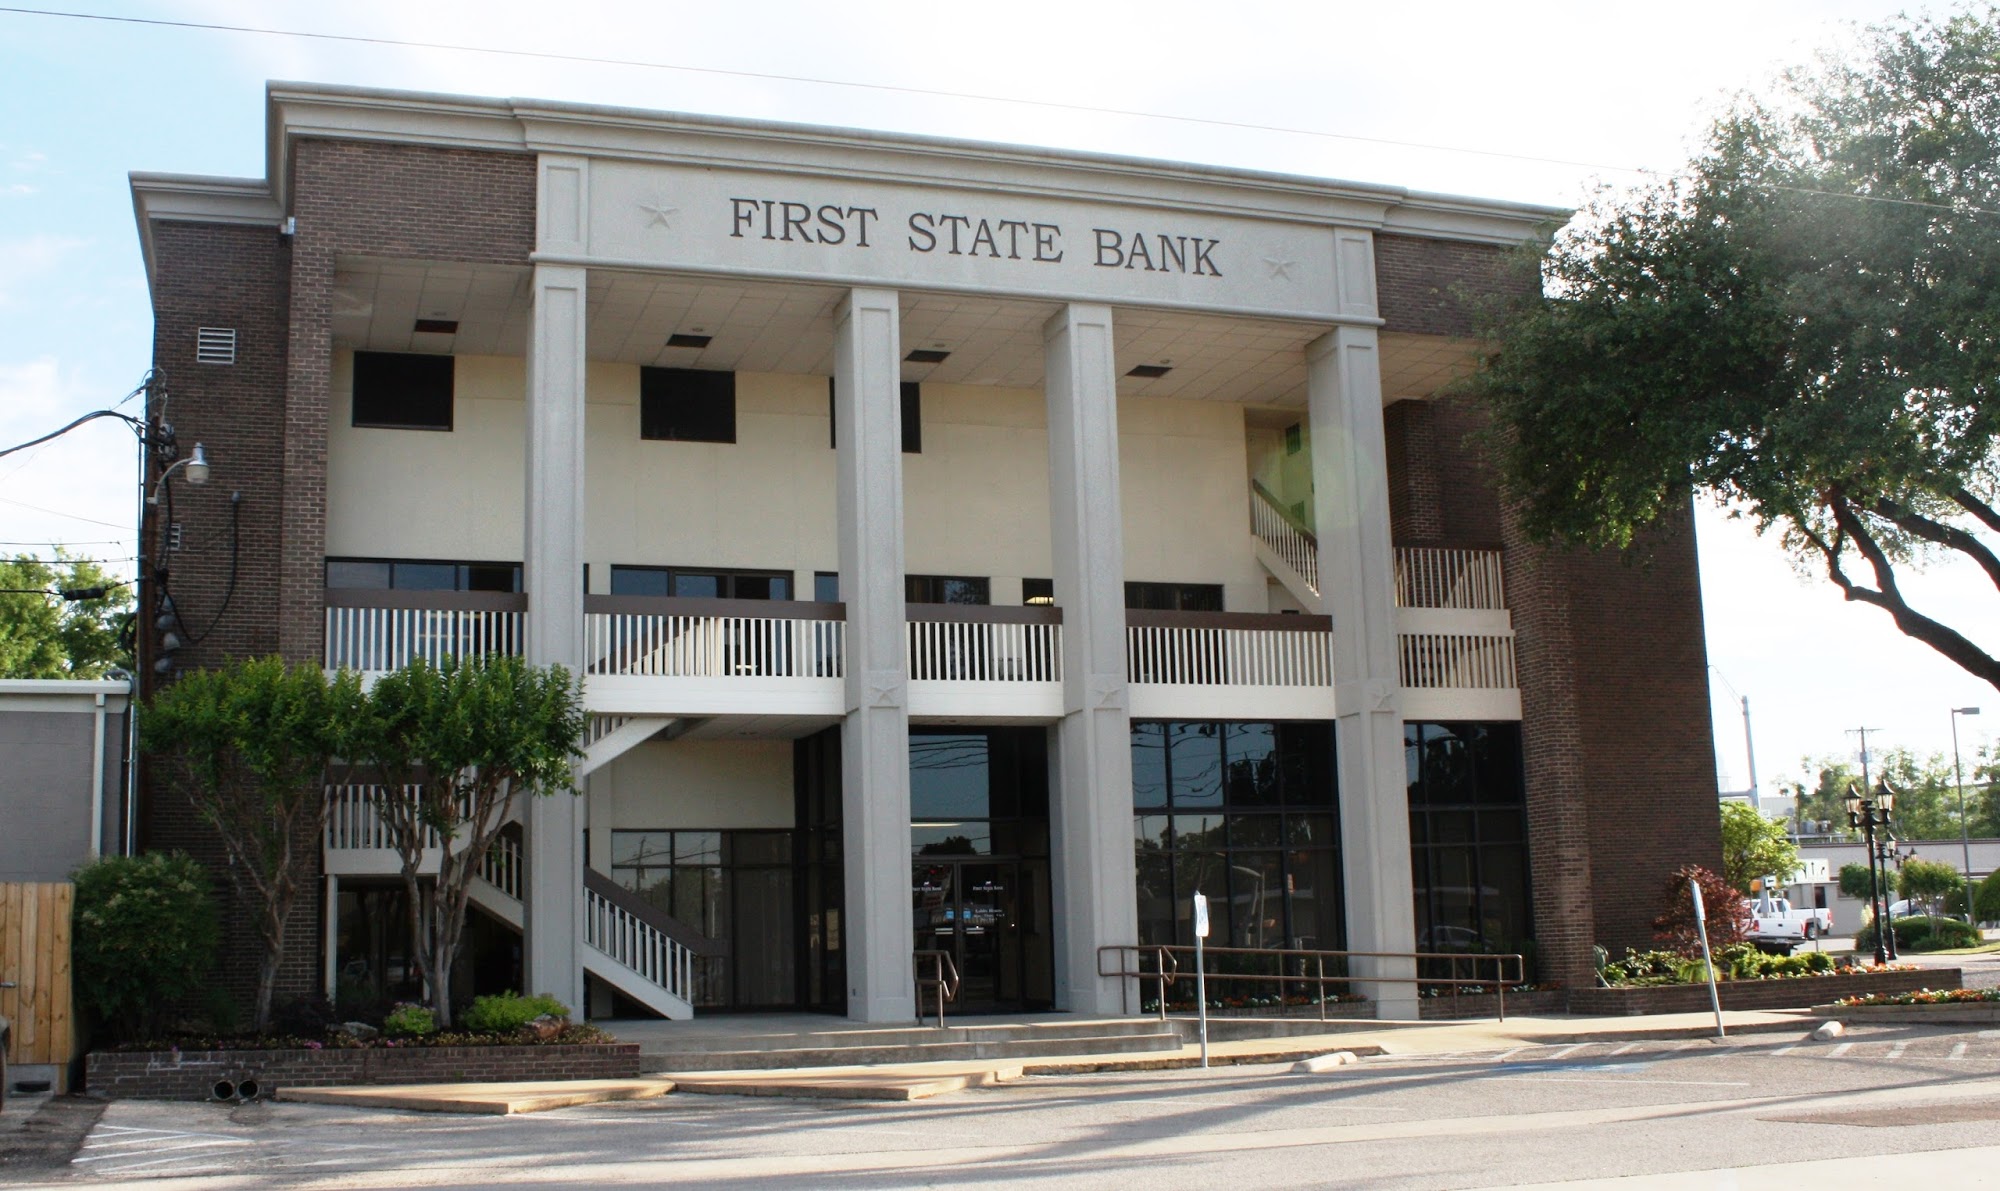 FIRST STATE BANK